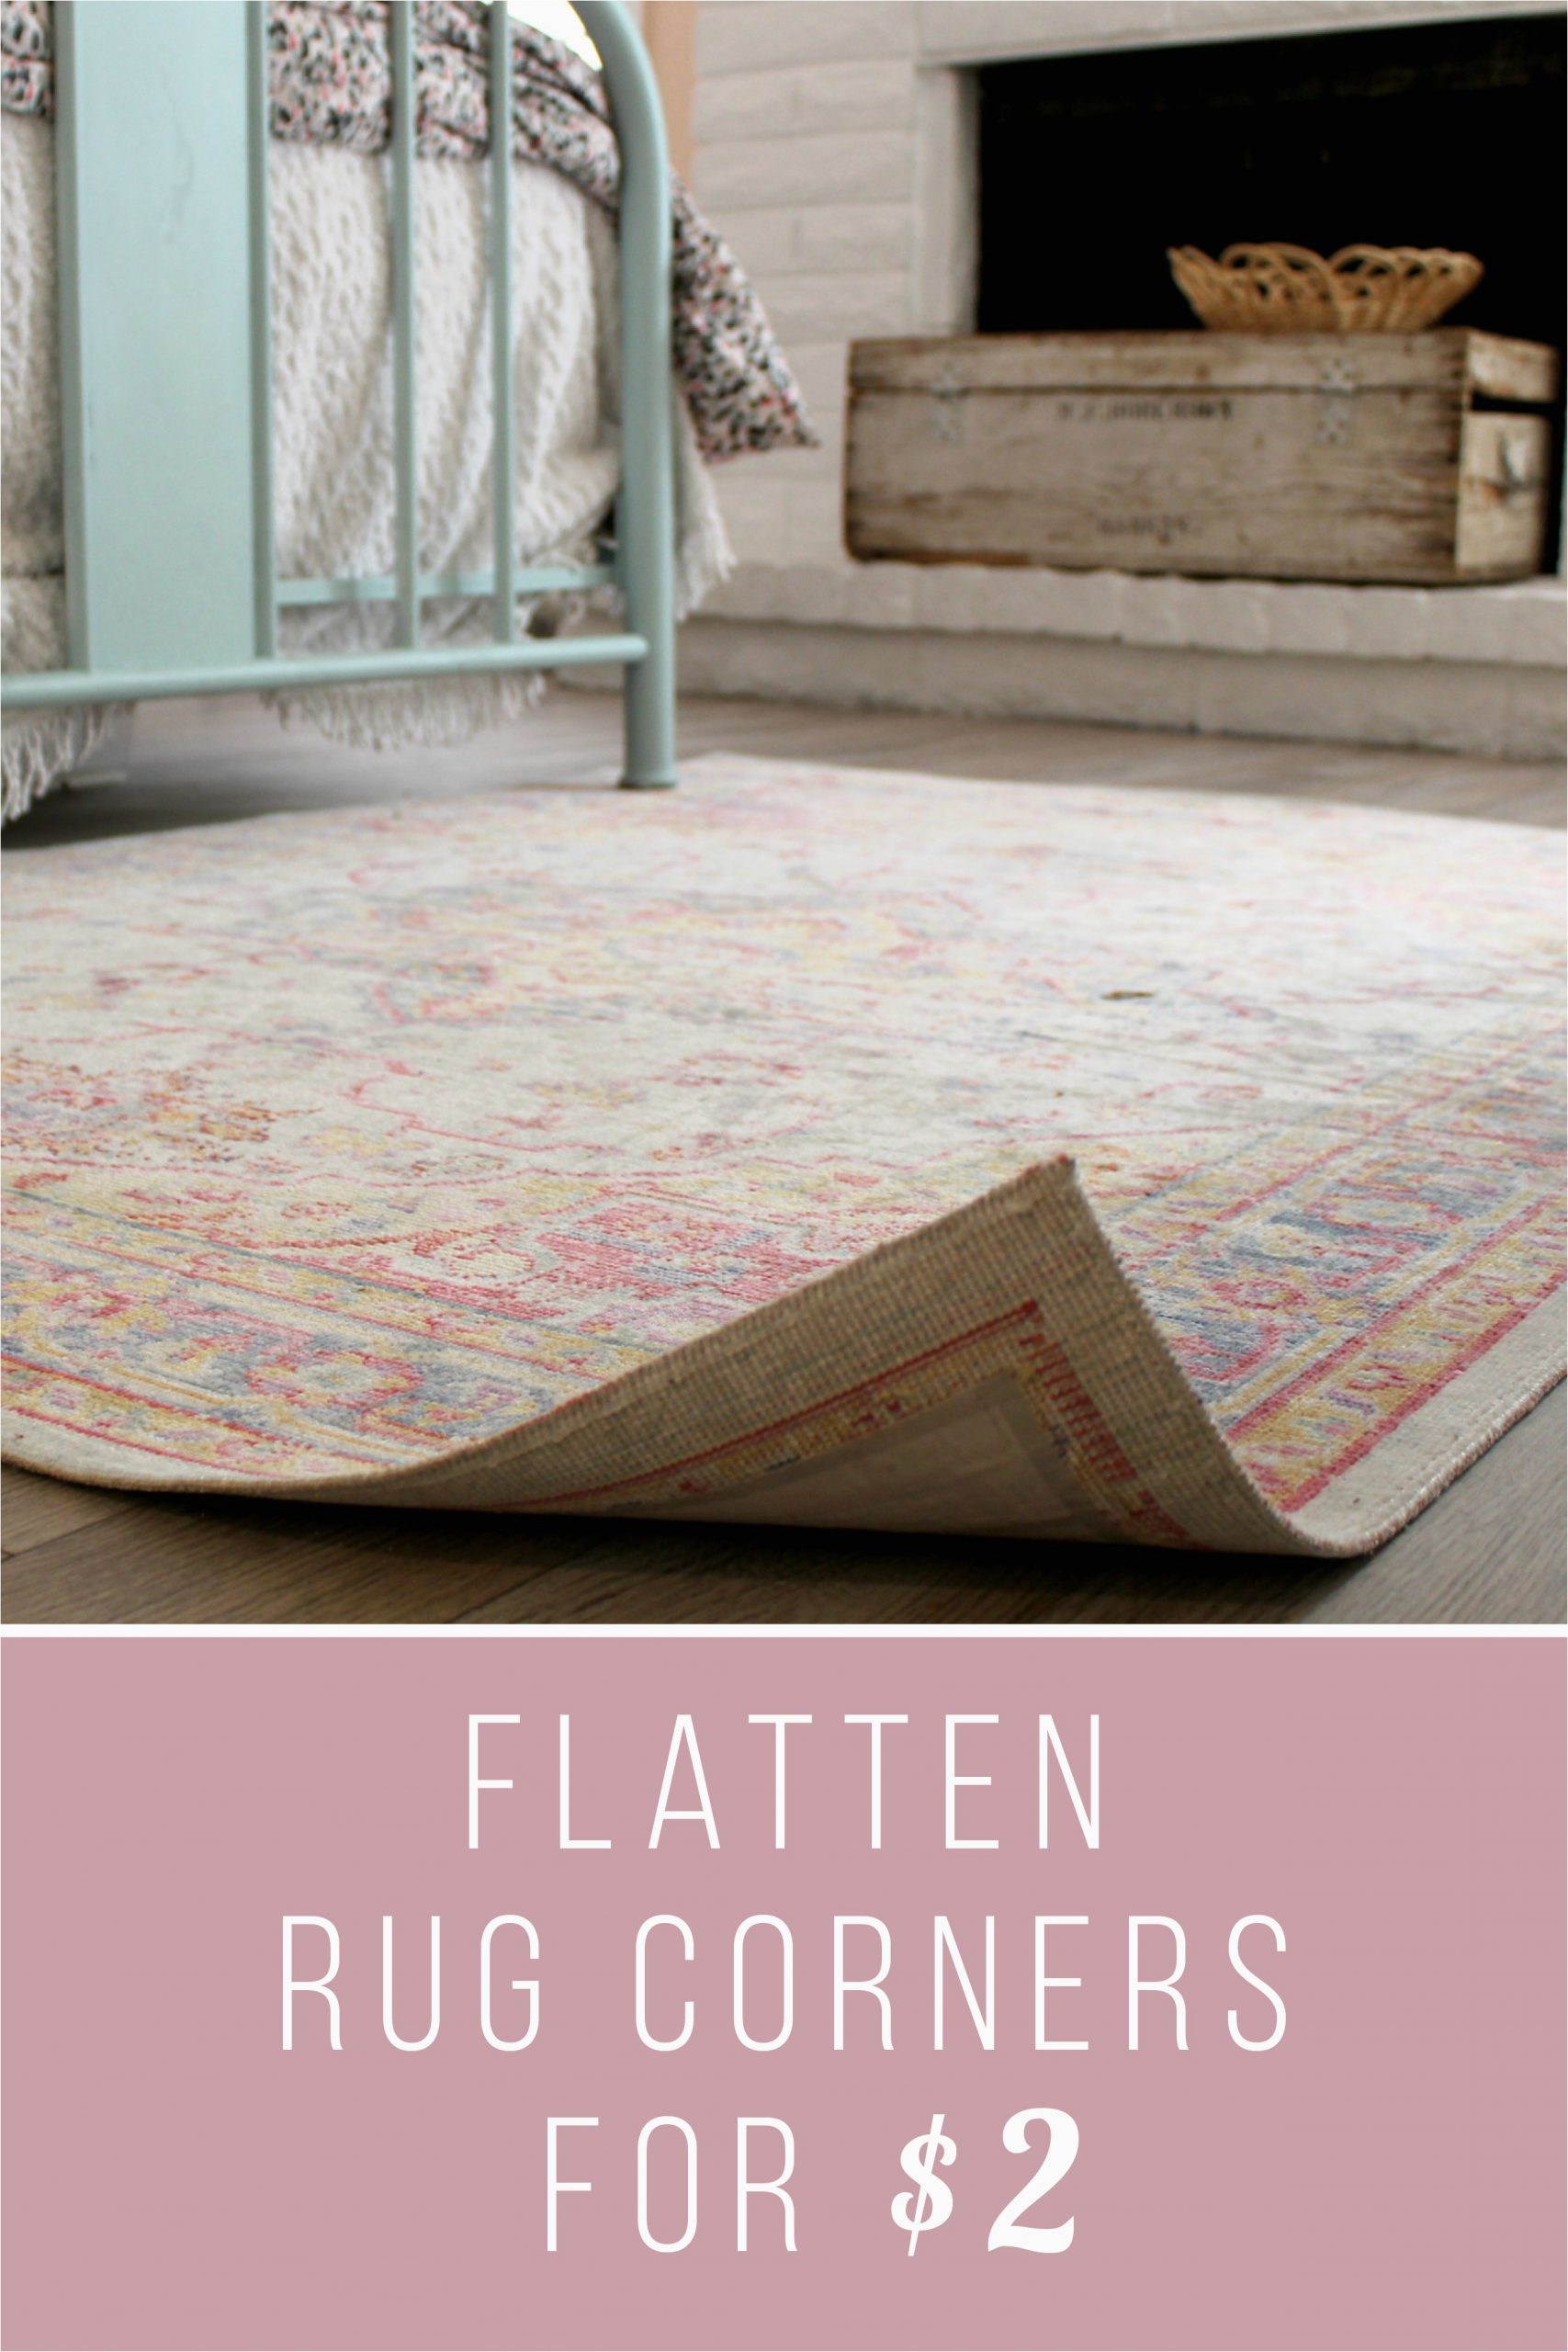 Stop area Rug From Sliding Flatten Rug Corners for $2 Barefoot Blonde by Amber